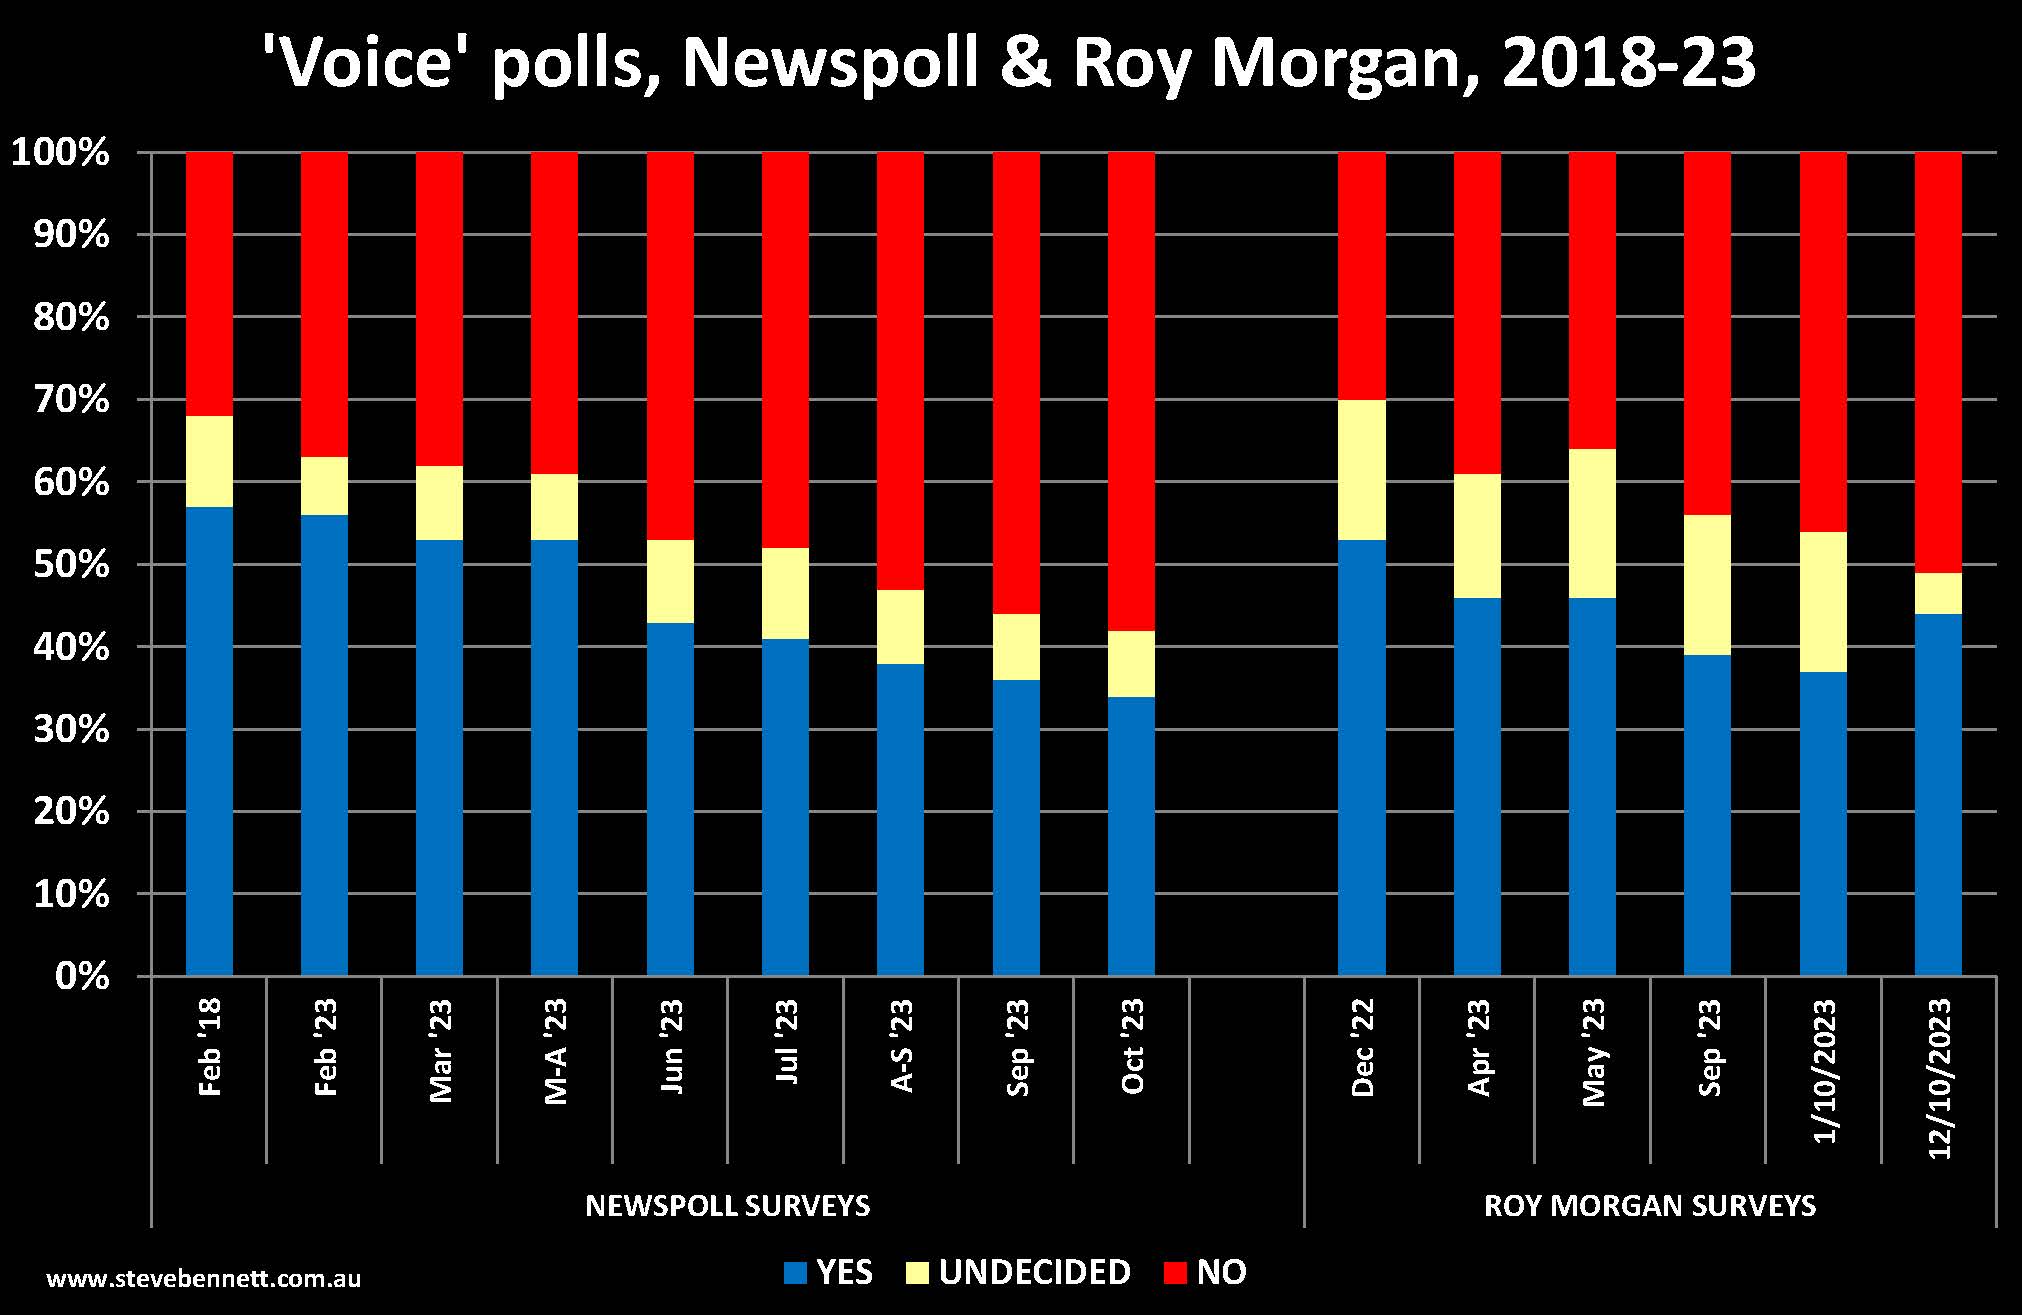 Poll results in chart for 'Voice referendum from Newspoll and Roy Morgan